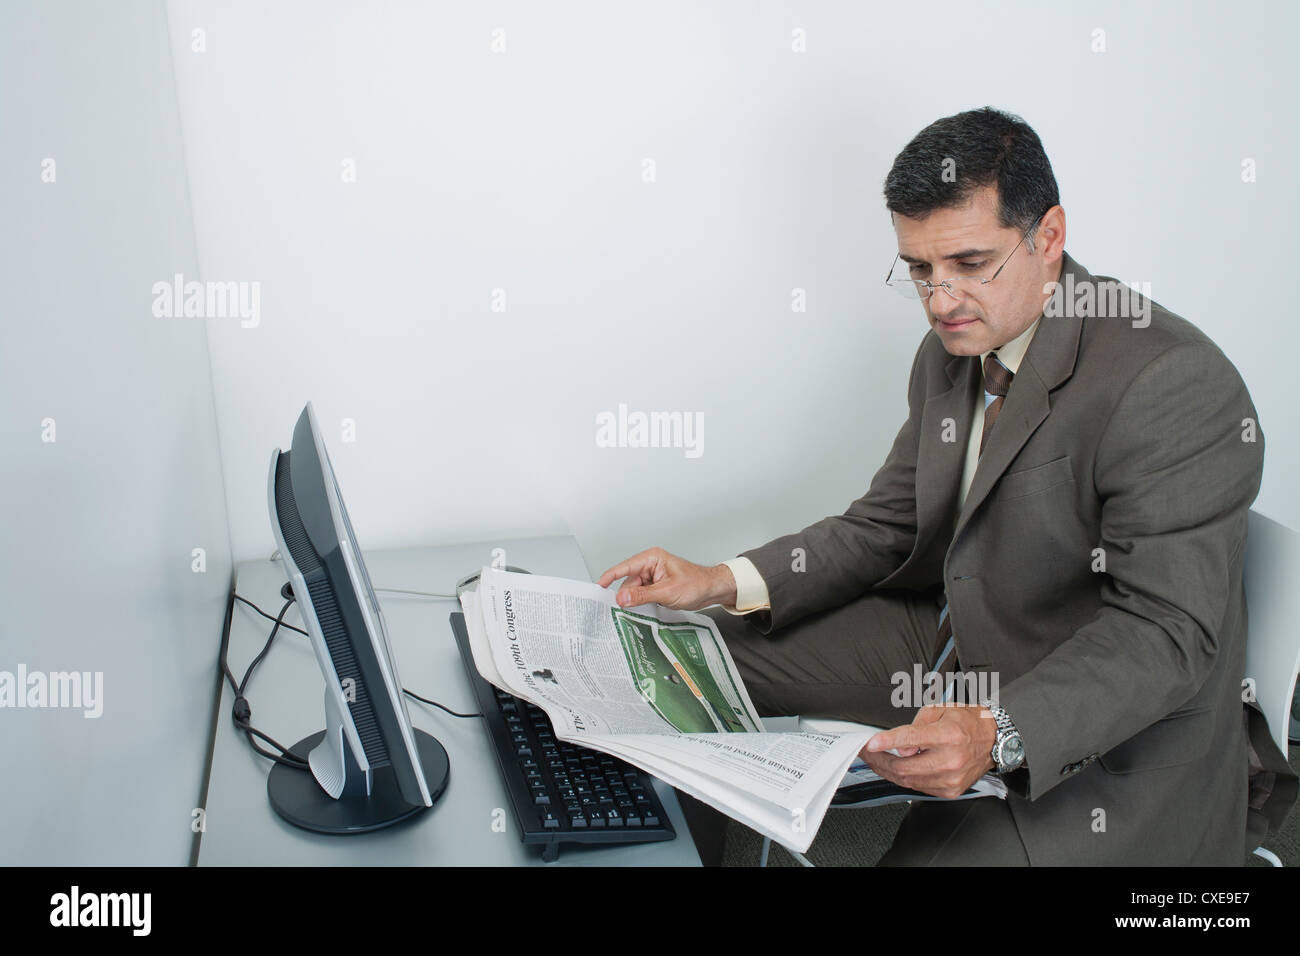 Businessman reading newspaper in office Stock Photo